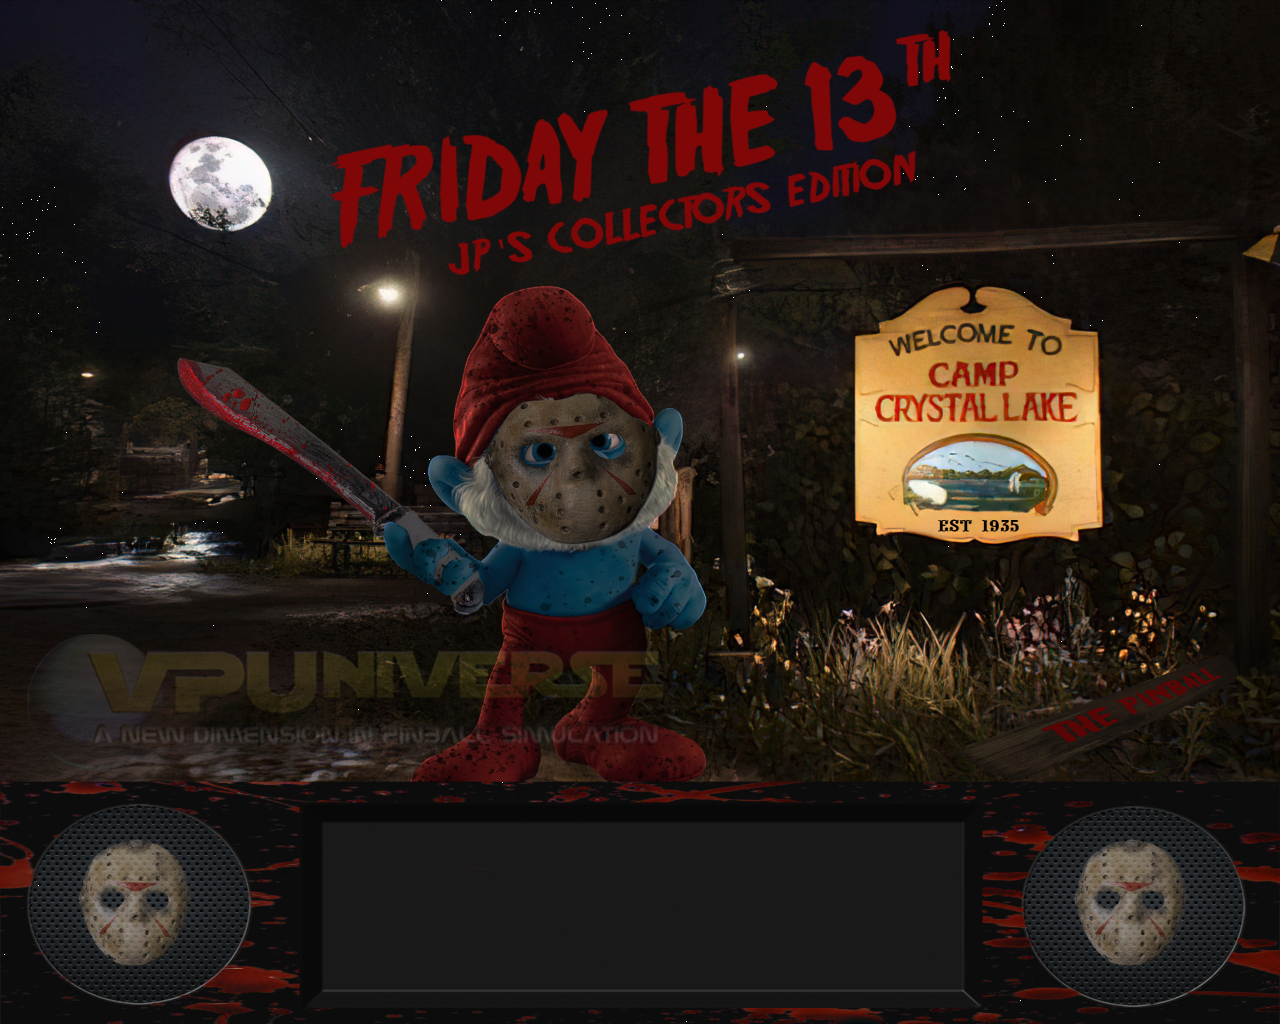 JP's Friday the 13th 